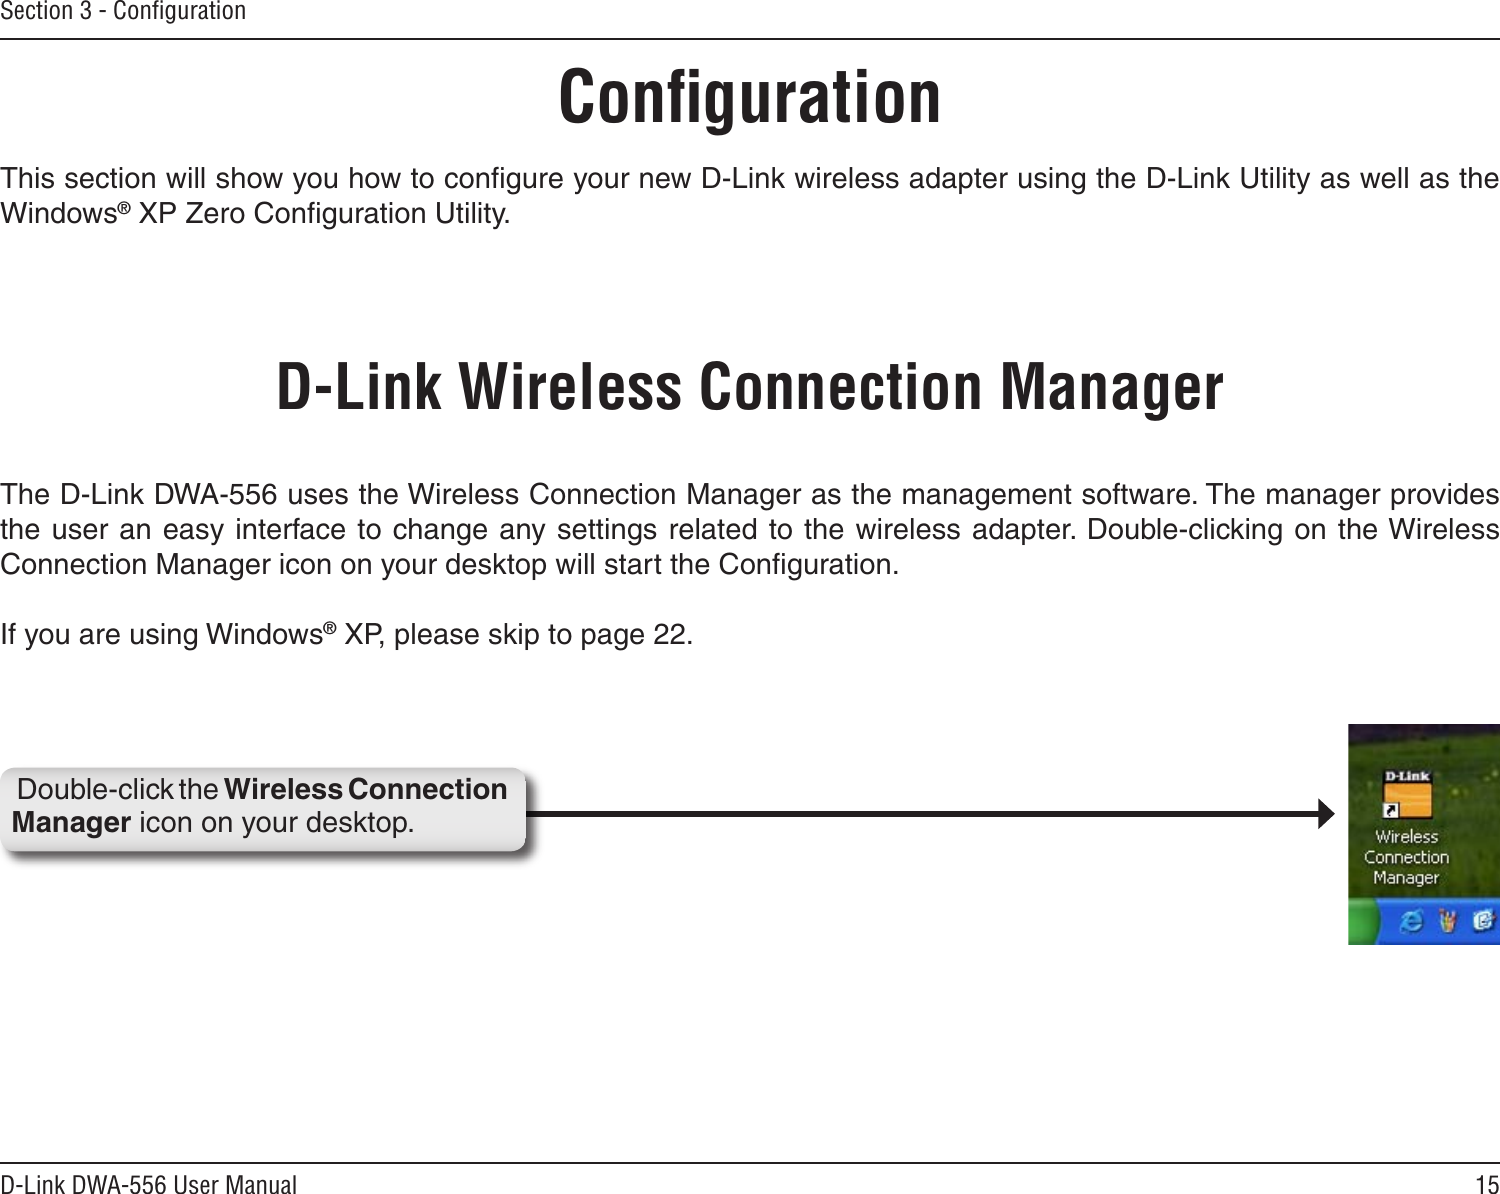 15D-Link DWA-556 User ManualSection 3 - ConﬁgurationConﬁgurationThis section will show you how to conﬁgure your new D-Link wireless adapter using the D-Link Utility as well as the Windows® XP Zero Conﬁguration Utility.D-Link Wireless Connection ManagerThe D-Link DWA-556 uses the Wireless Connection Manager as the management software. The manager provides the user an easy interface to change any settings related to the wireless adapter. Double-clicking on the Wireless Connection Manager icon on your desktop will start the Conﬁguration.If you are using Windows® XP, please skip to page 22.Double-click the Wireless Connection Manager icon on your desktop.